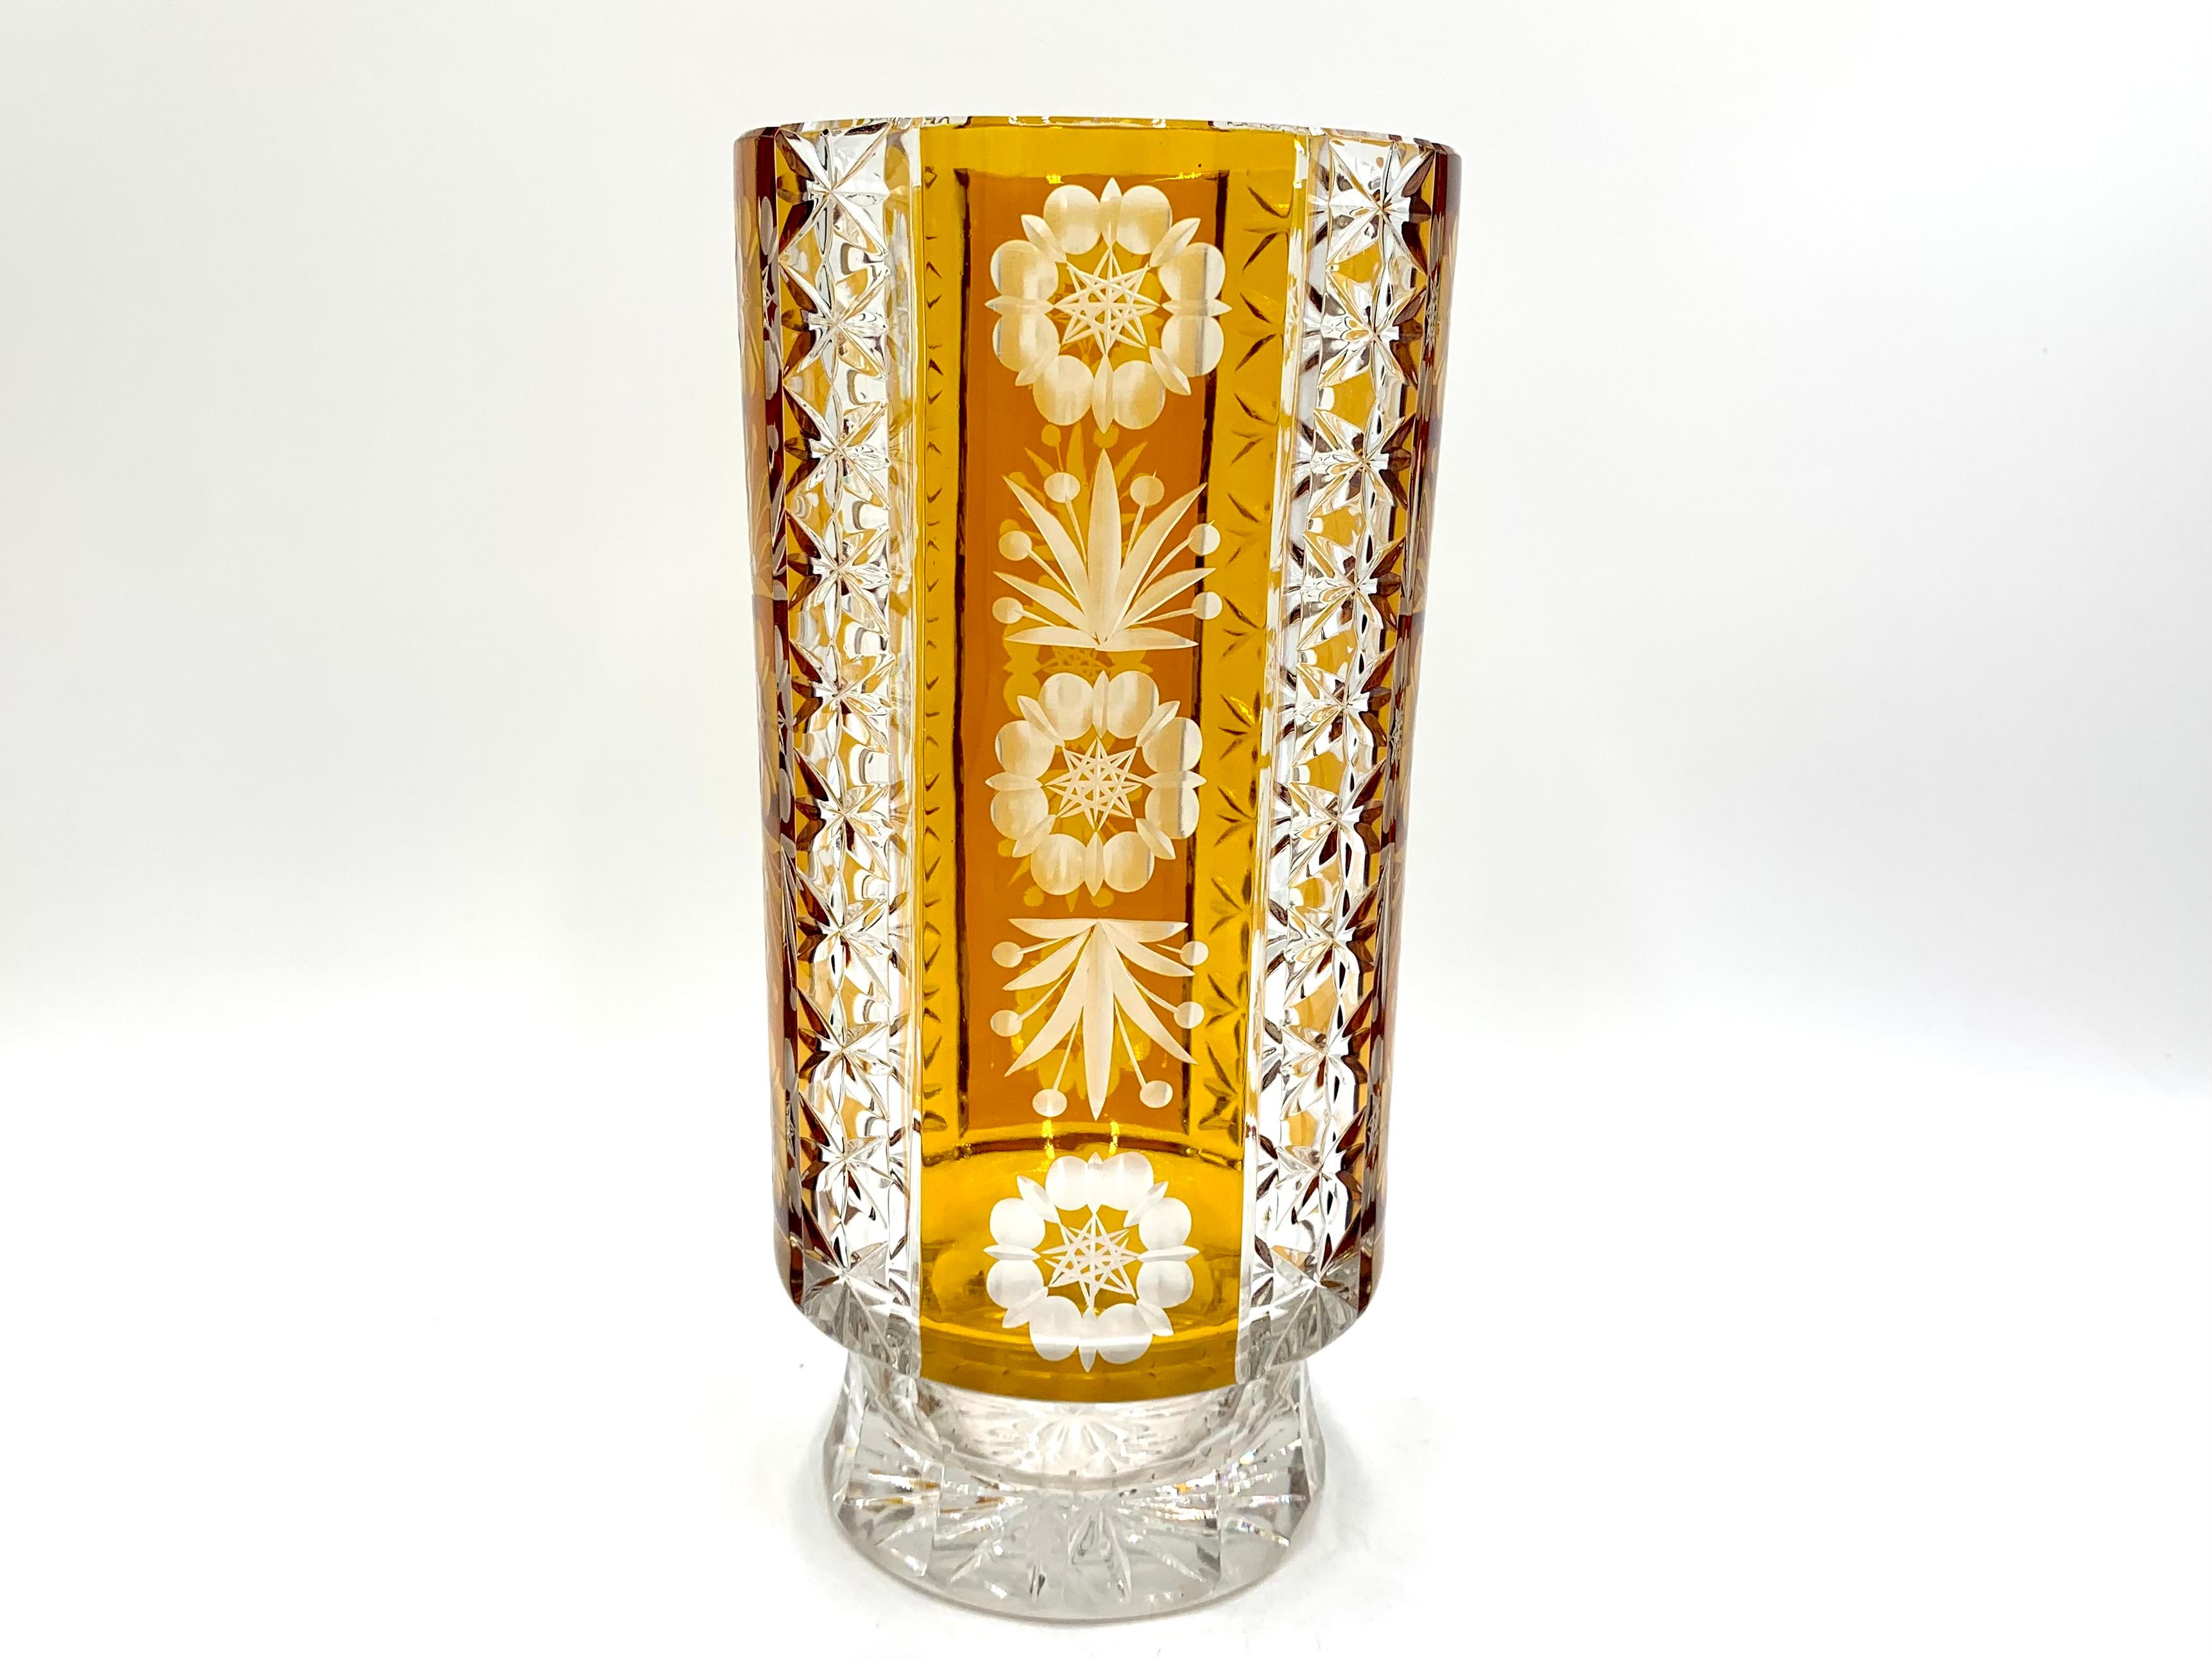 Crystal vase with honey glass and pattern. Produced in Poland by the Julia Glassworks in the 1960s.

Very good condition.

Measures: height 29cm, diameter 14cm.